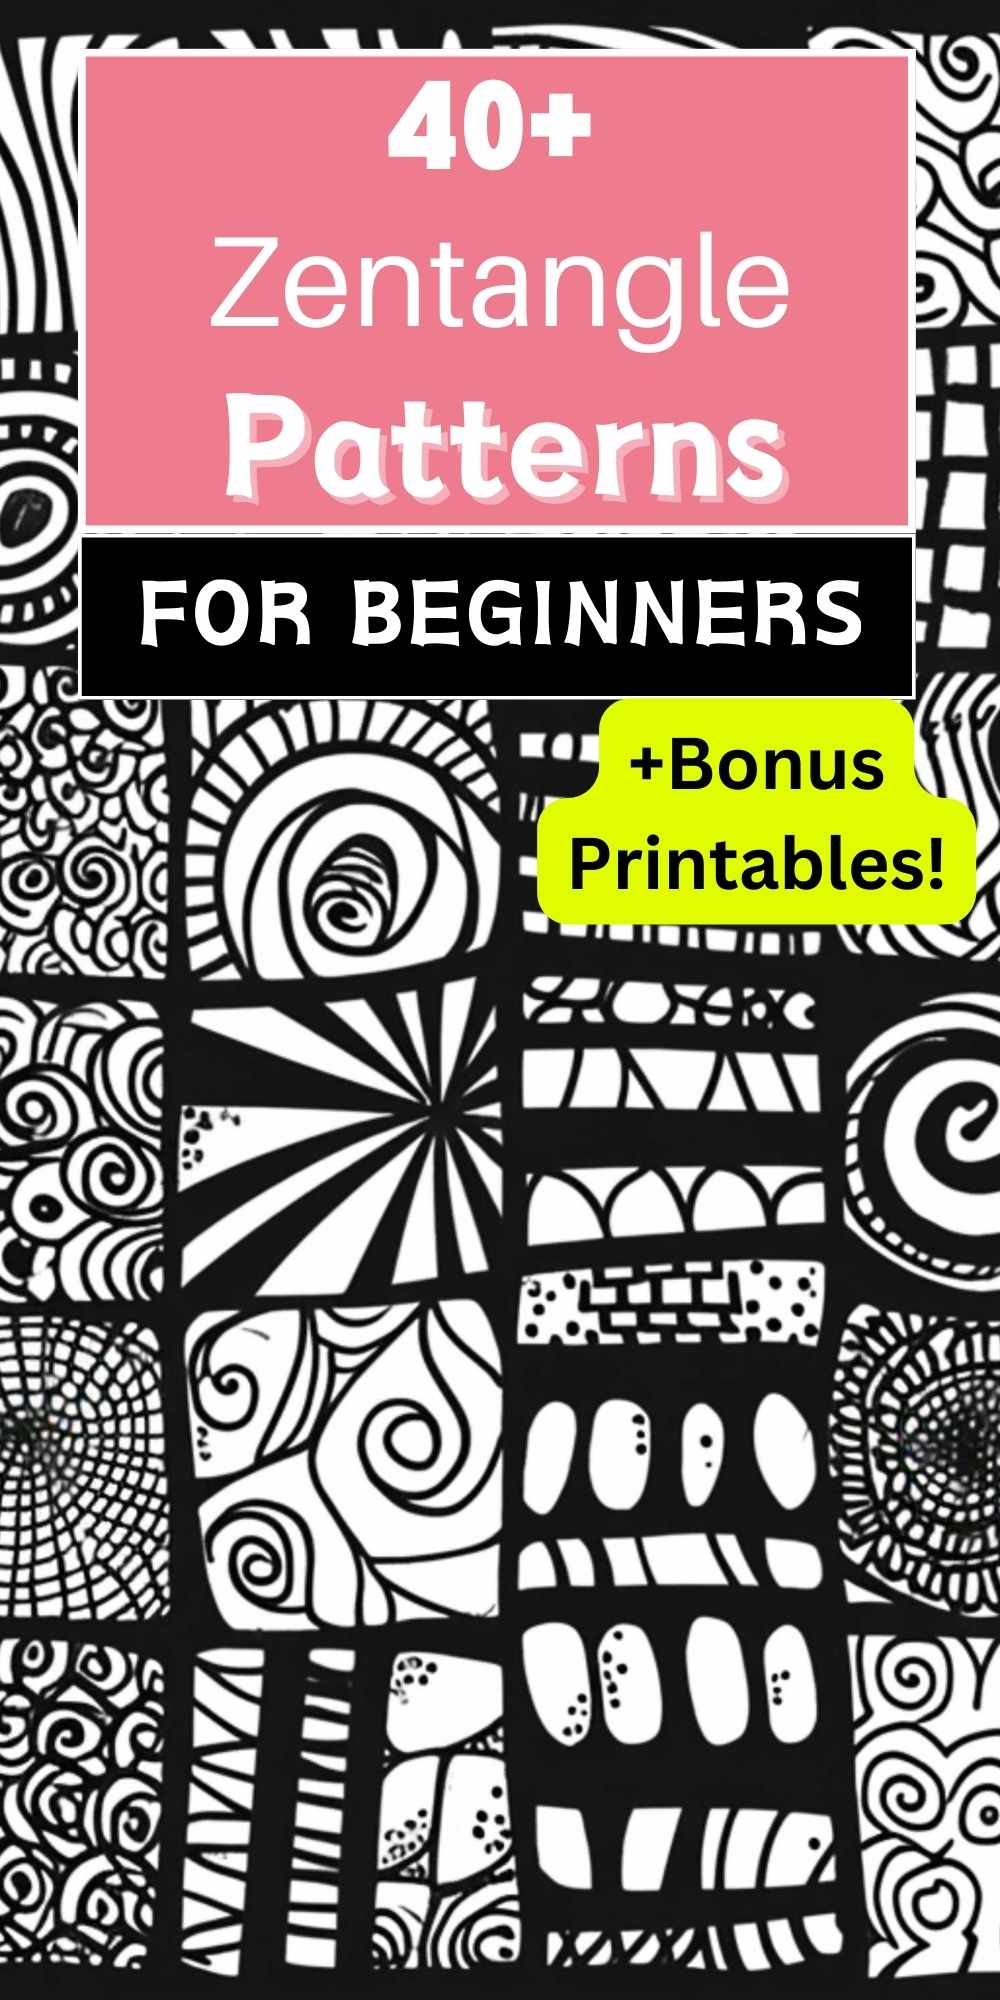 41+ Zentangle Patterns for Every Artist - Simple to Complex ...